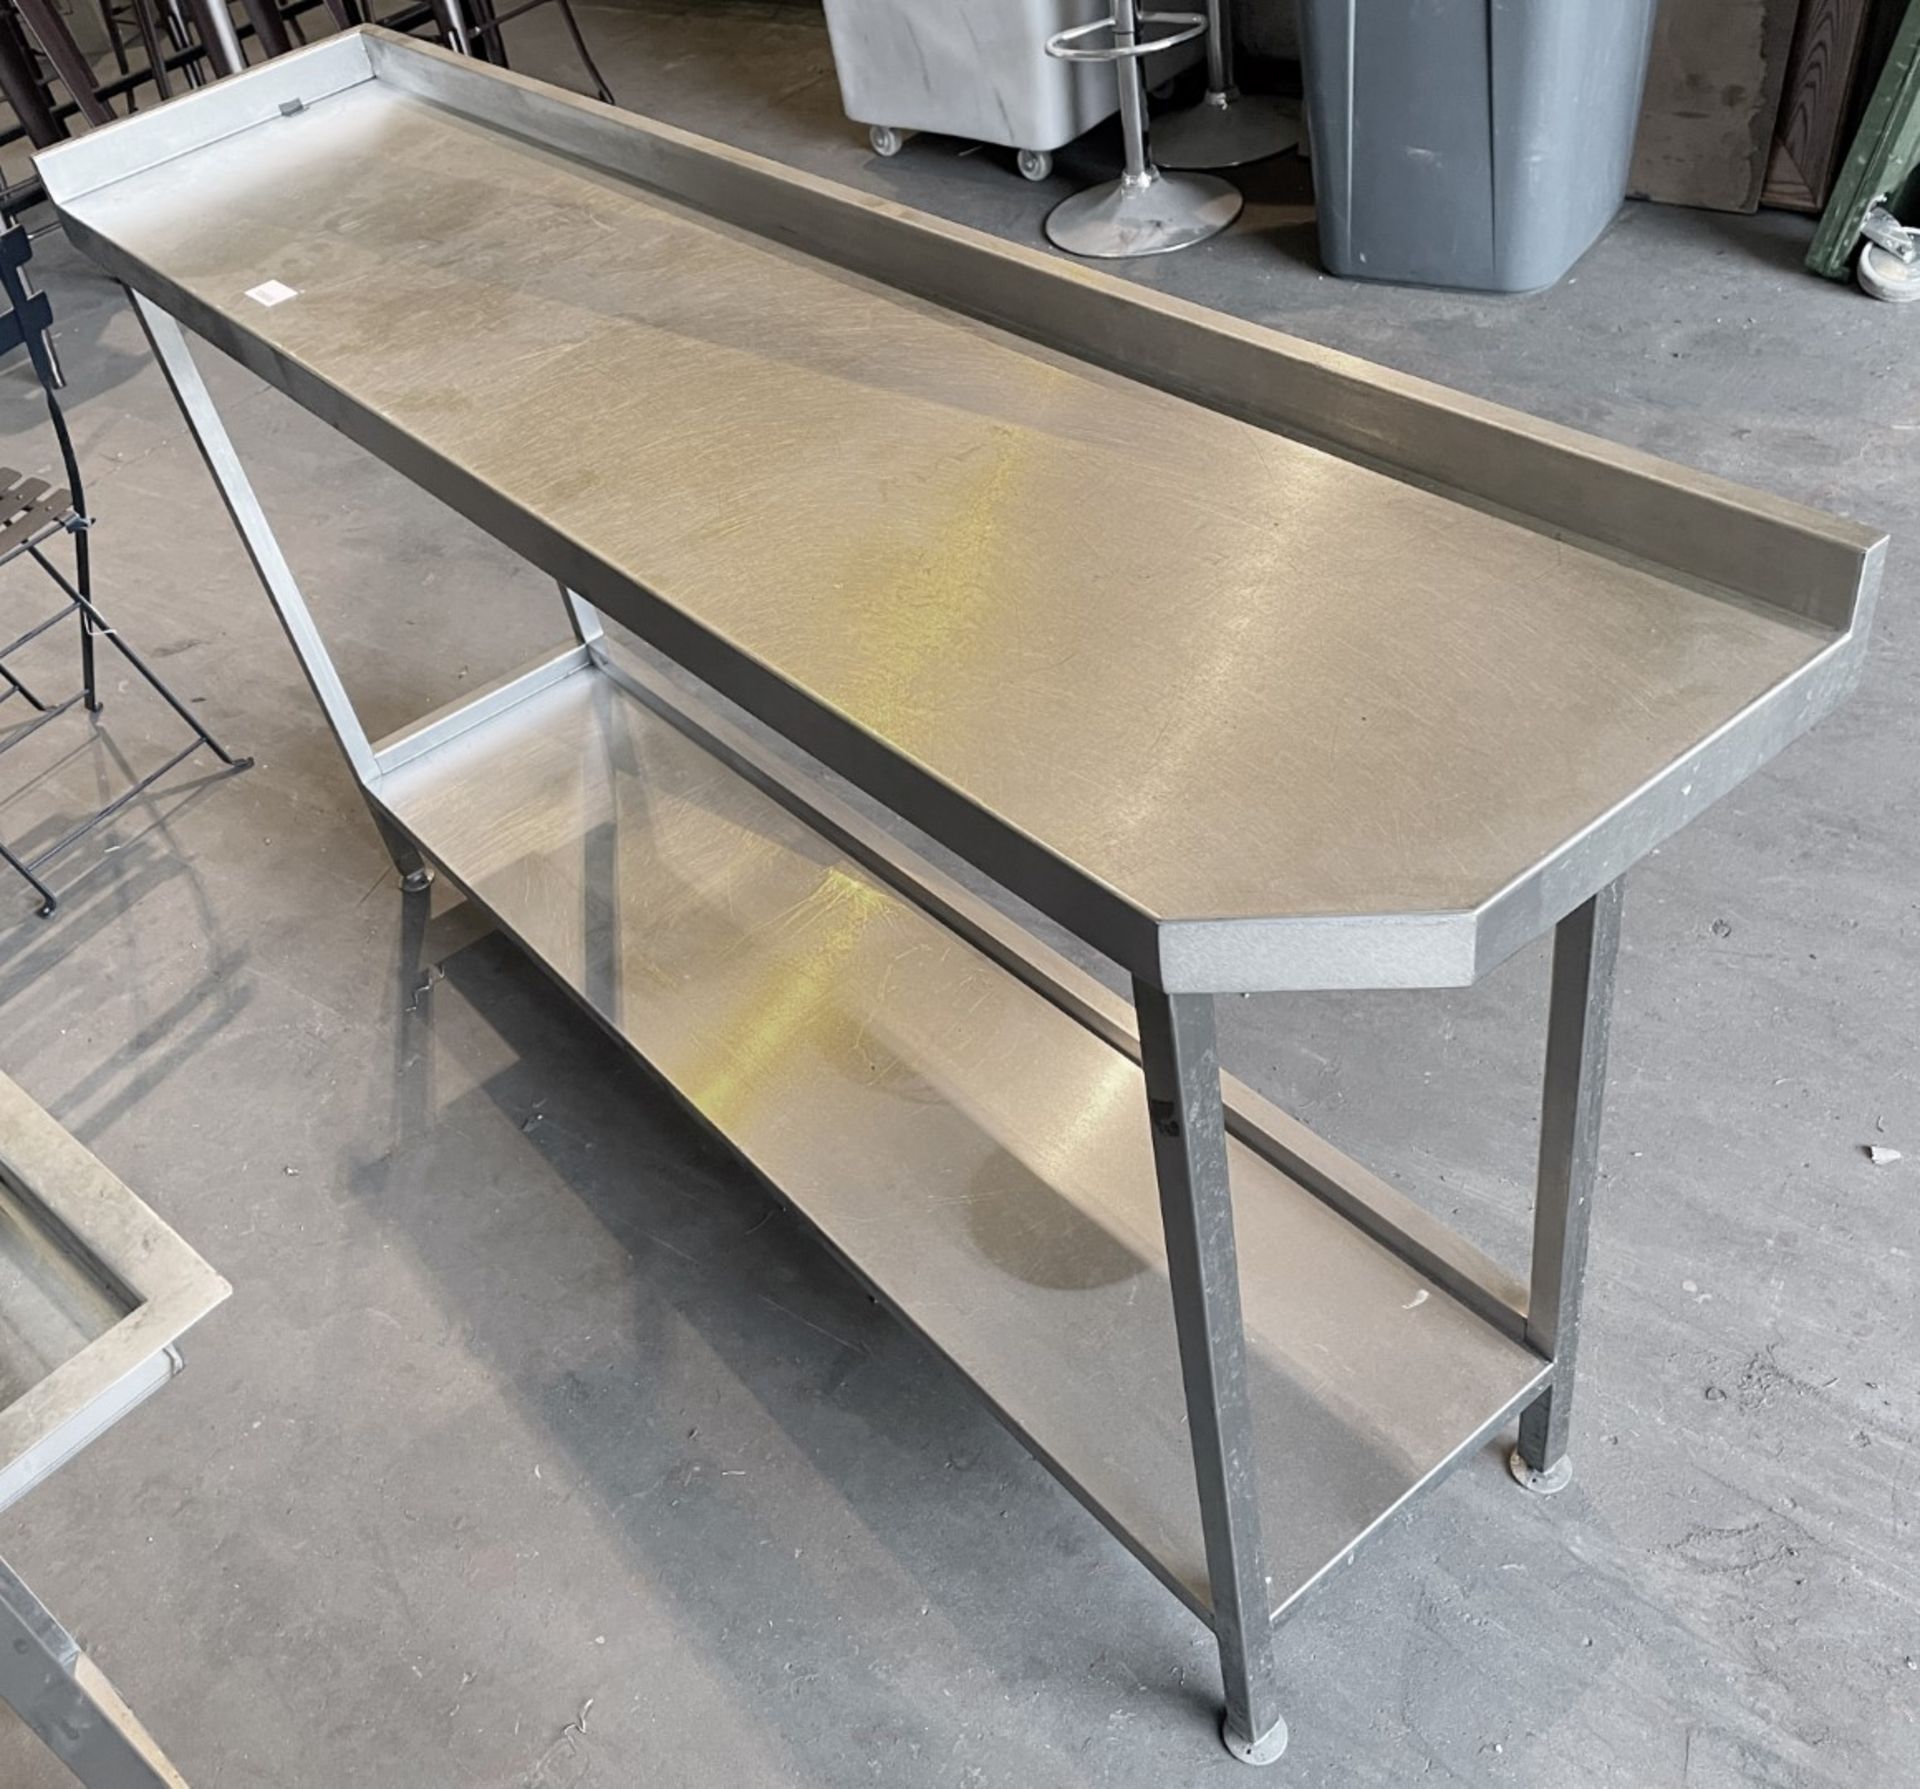 1 x Narrow Stainless Steel Prep Table - Approx 180X40X90Cm - Ref: FGN046 - CL834 - Location: Essex, - Image 2 of 4